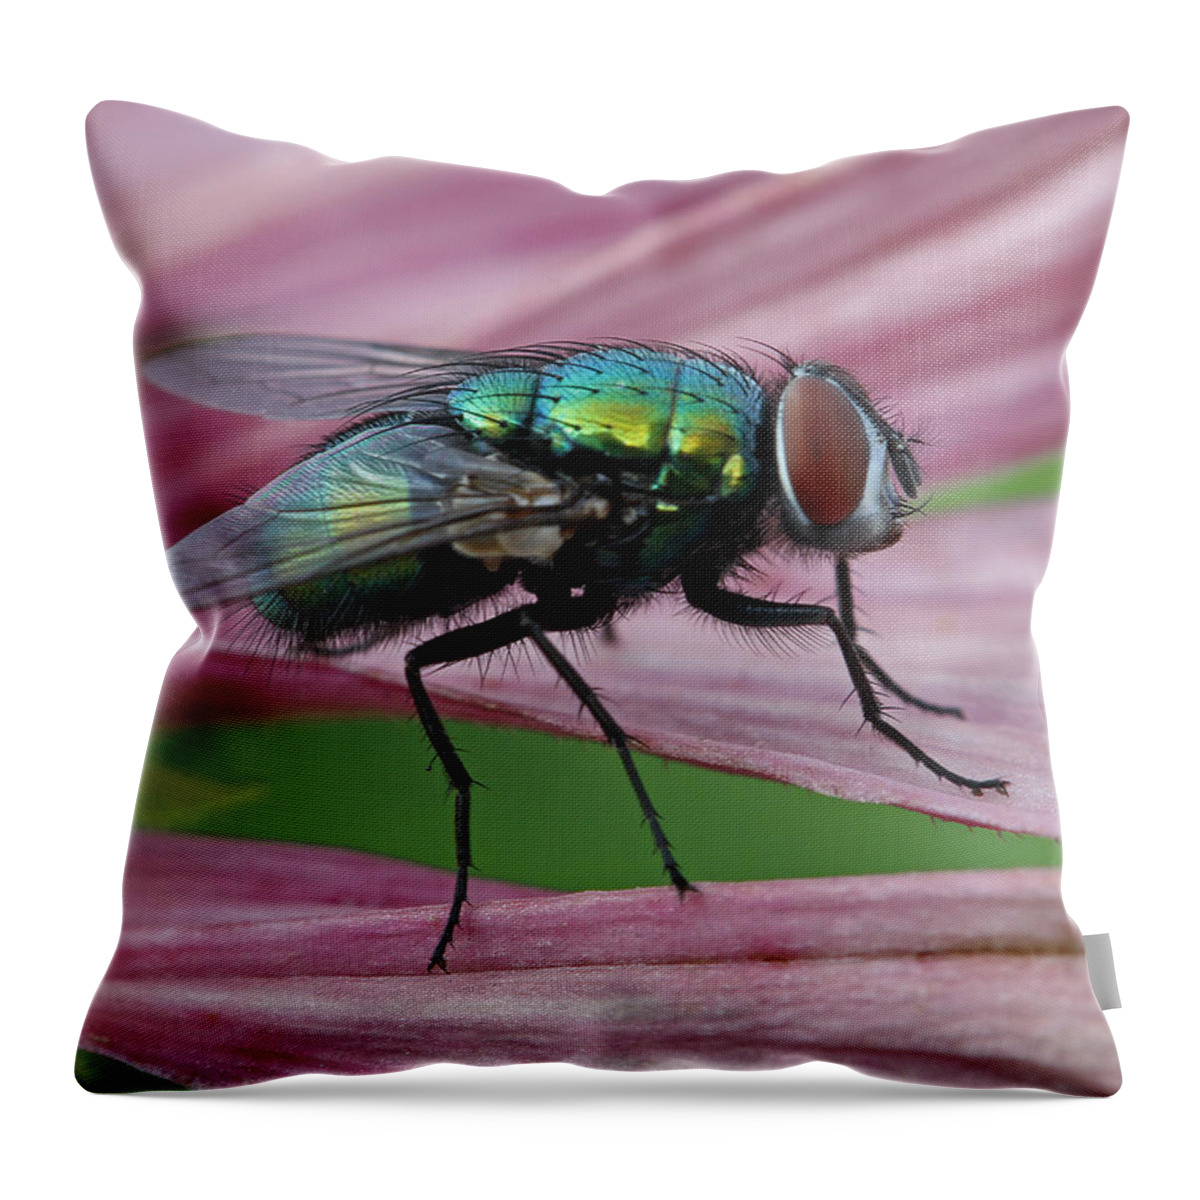 Fly Throw Pillow featuring the photograph Start Your Engines by Juergen Roth